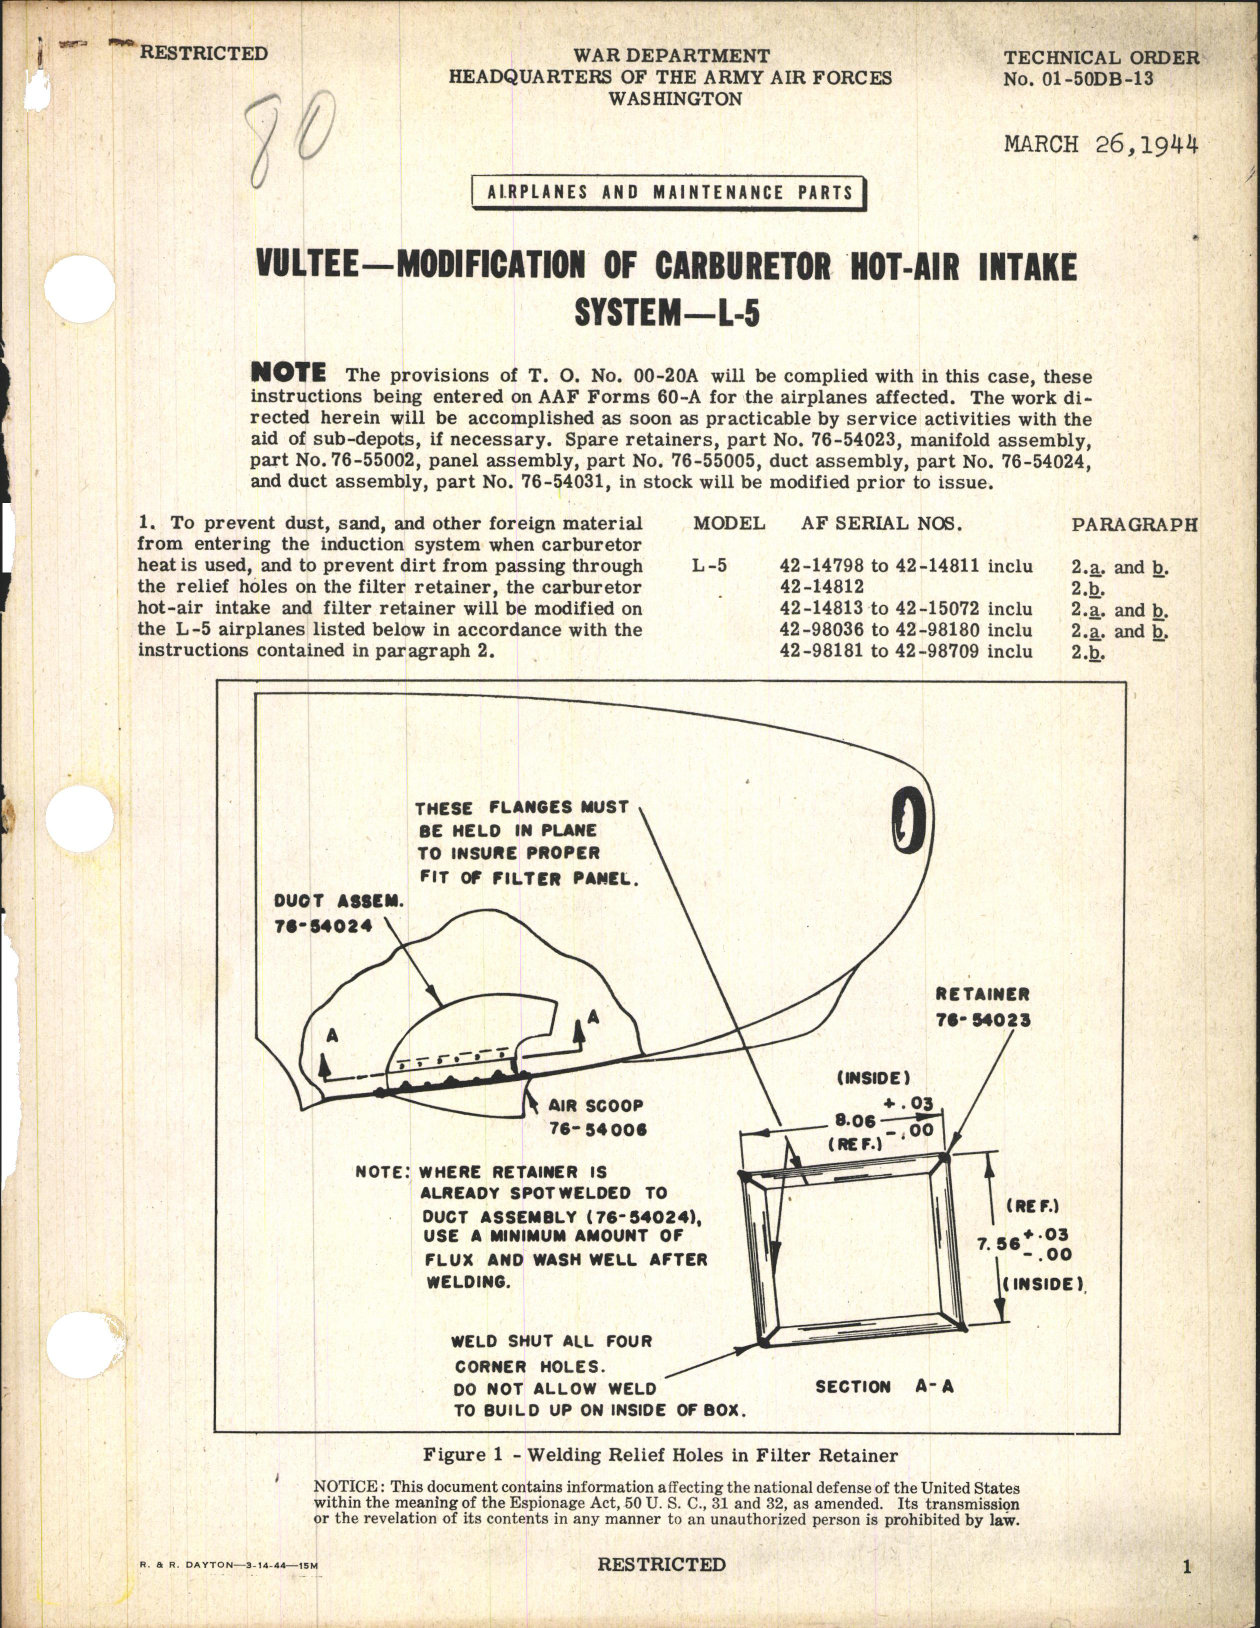 Sample page 1 from AirCorps Library document: Modification of Carburetor Hot-Air Intake System for L-5